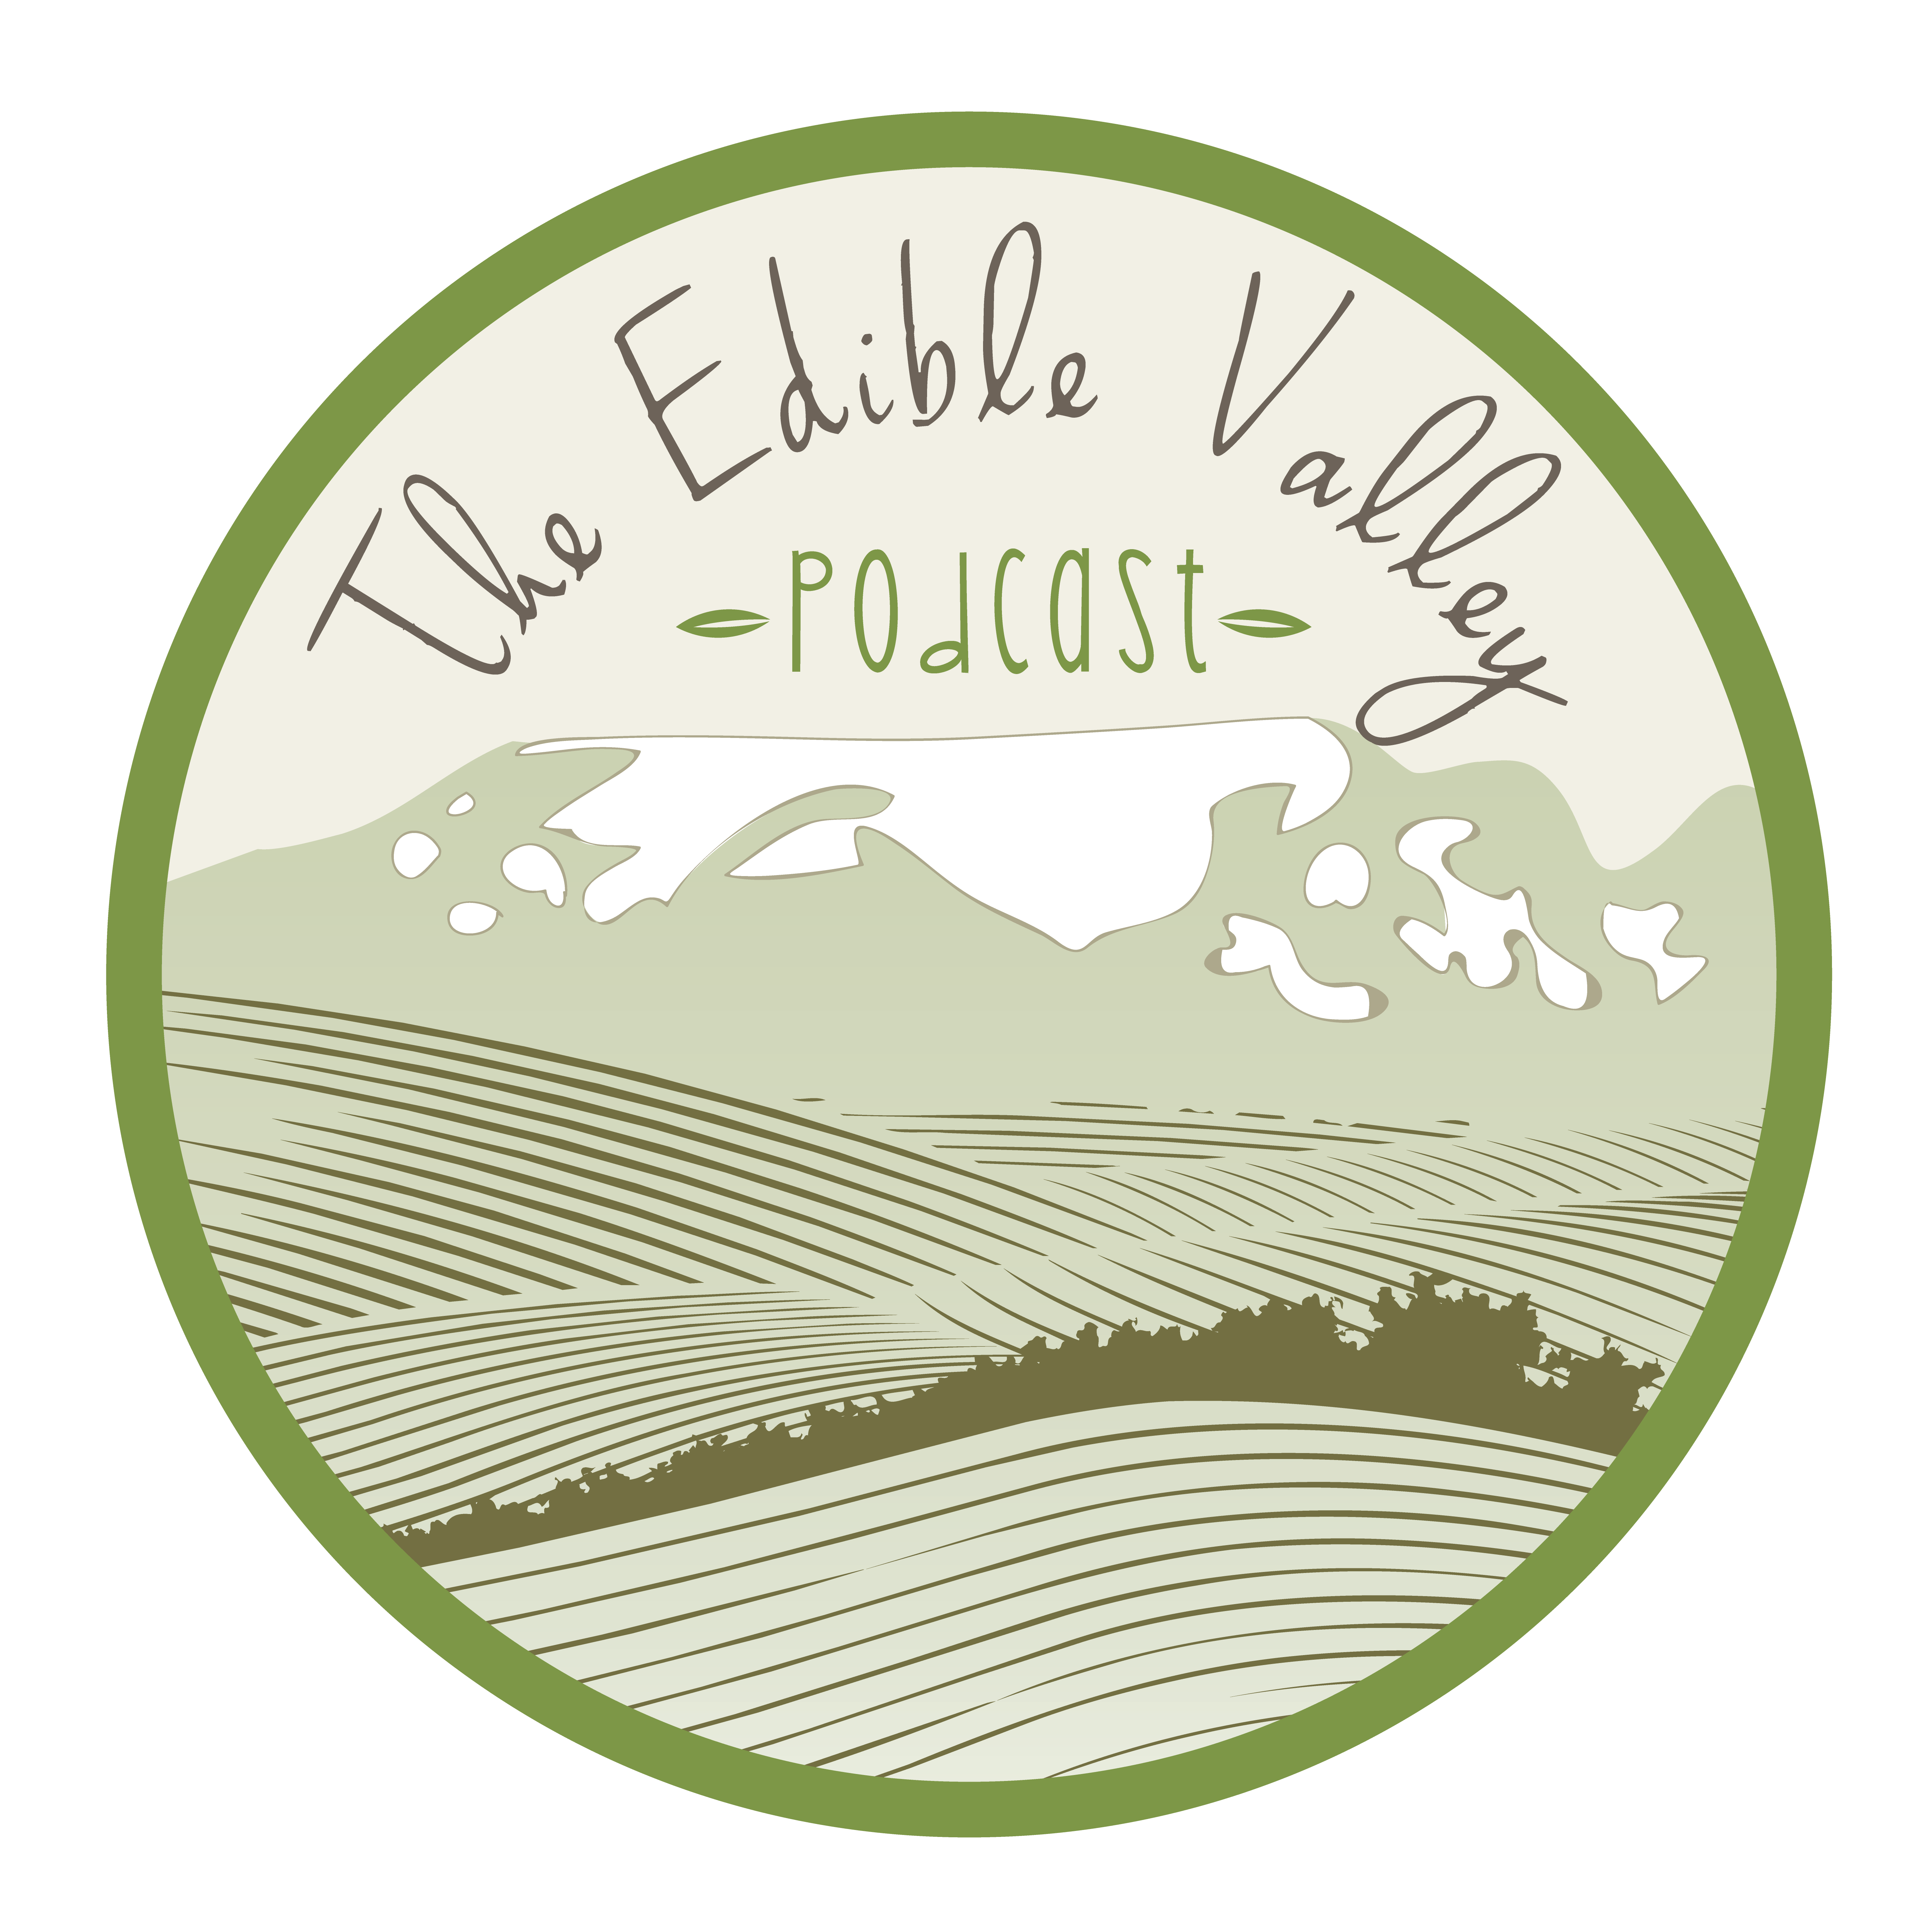 Edible Valley presents Food Facts with Darren Howlett